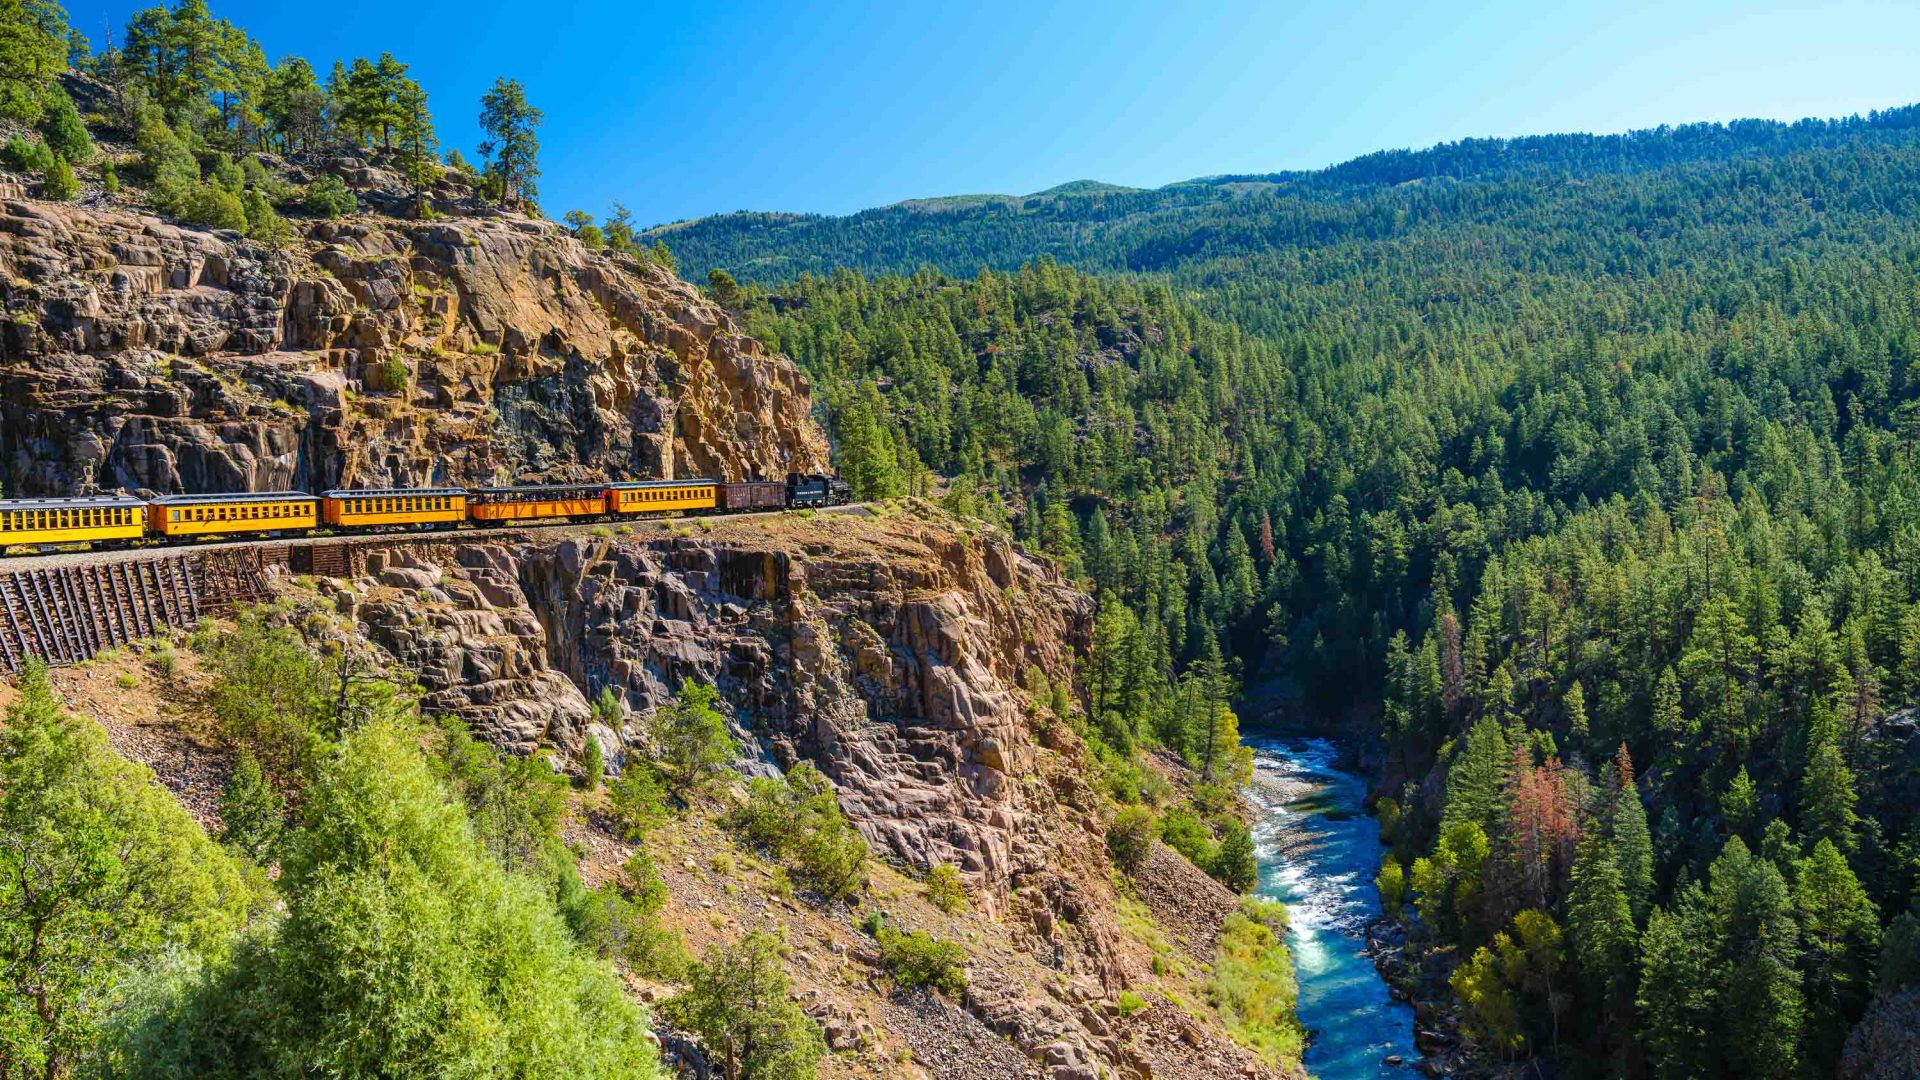 The Durango train winds through the tree covered mountains. There is a river far below.